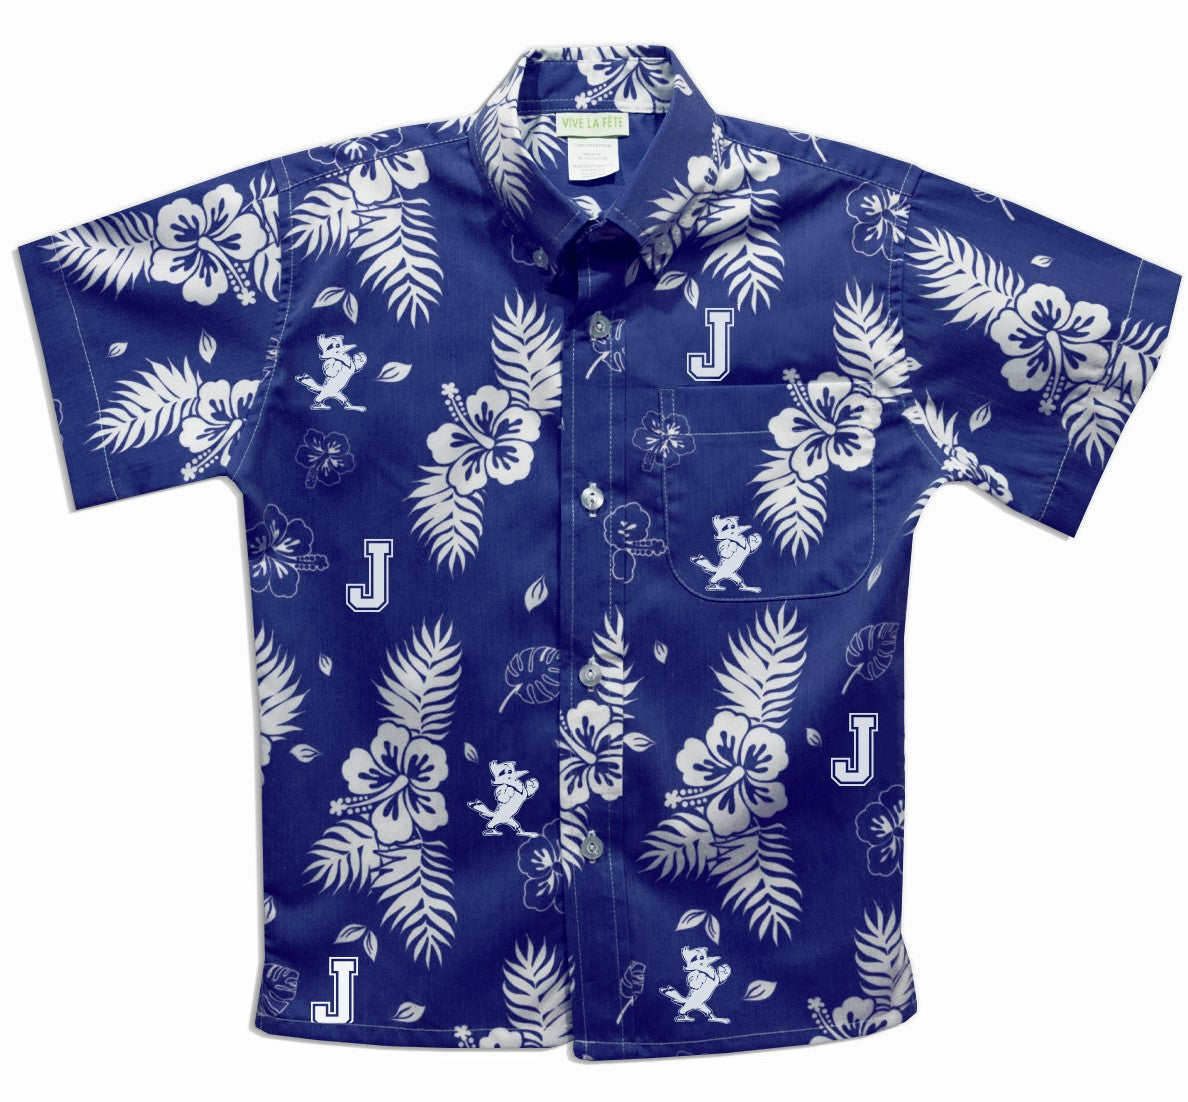 Vive La Fete.  80% Polyester/20% Cotton.  Button down short sleeve shirt with a roomy fit.  Classic Hawaiian print in Royal Blue & White with the J and Jayson logos!